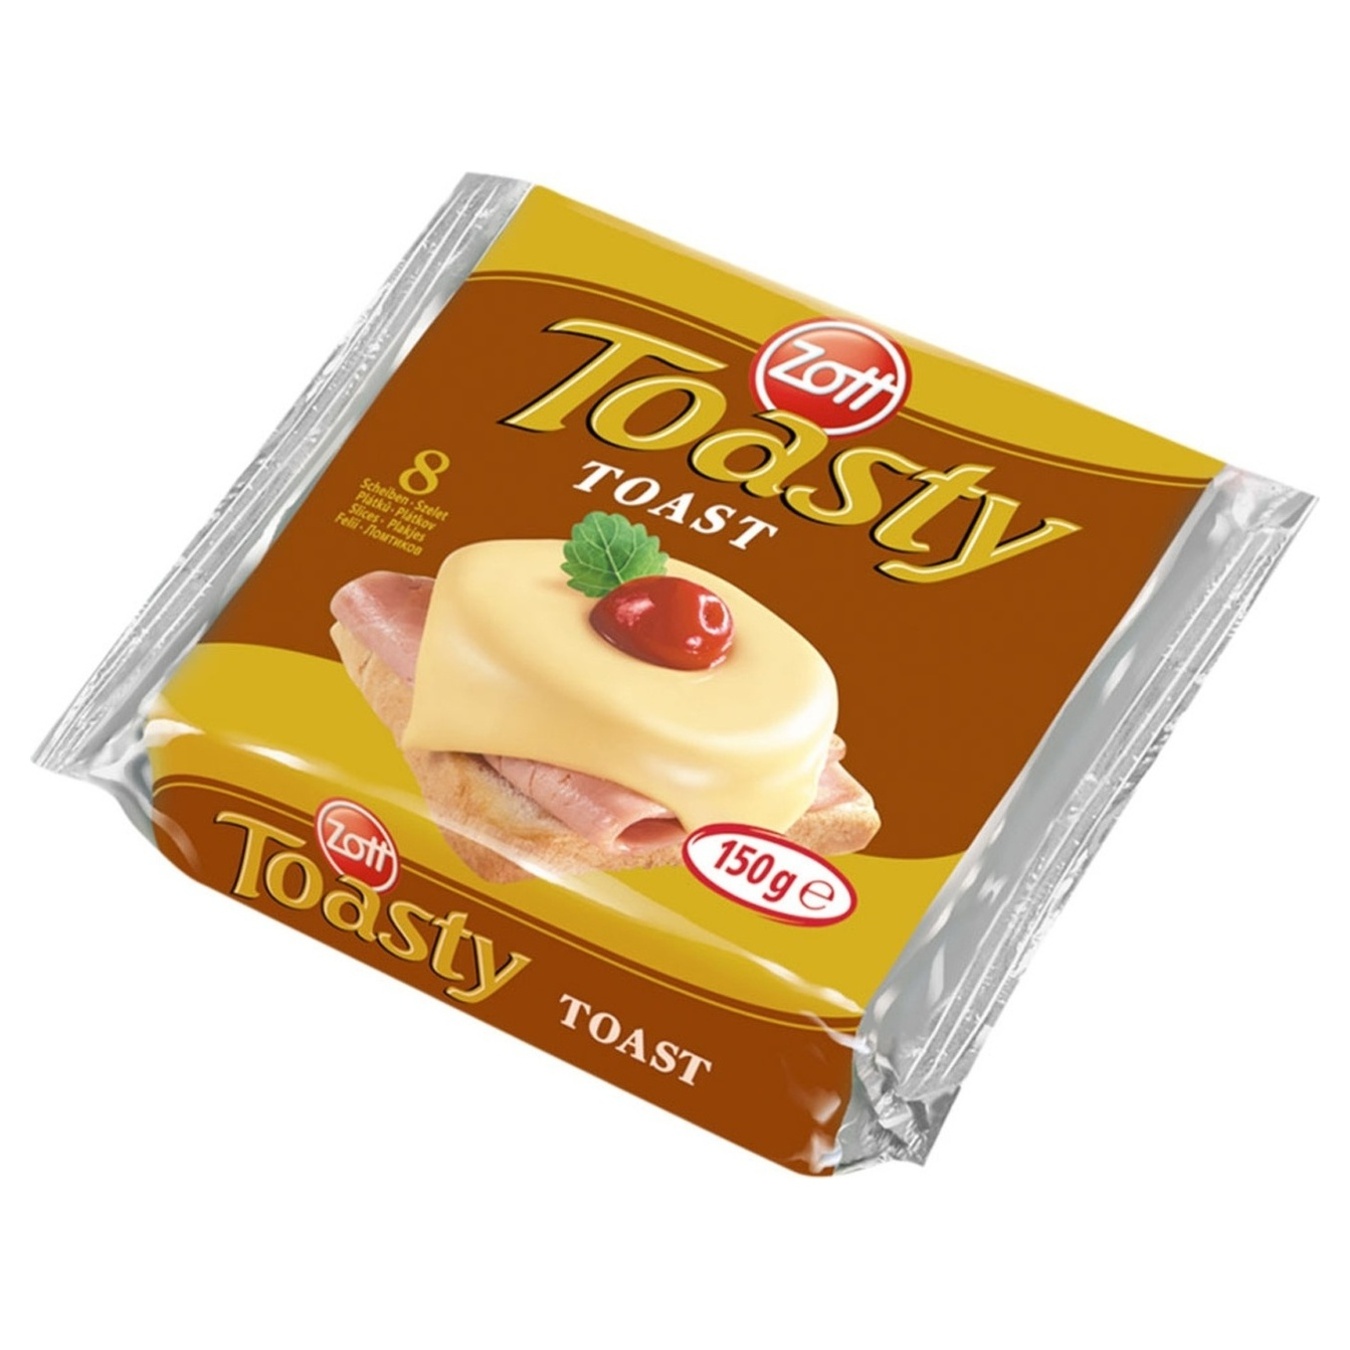 Toasted cheese 22% Zott 150g 2